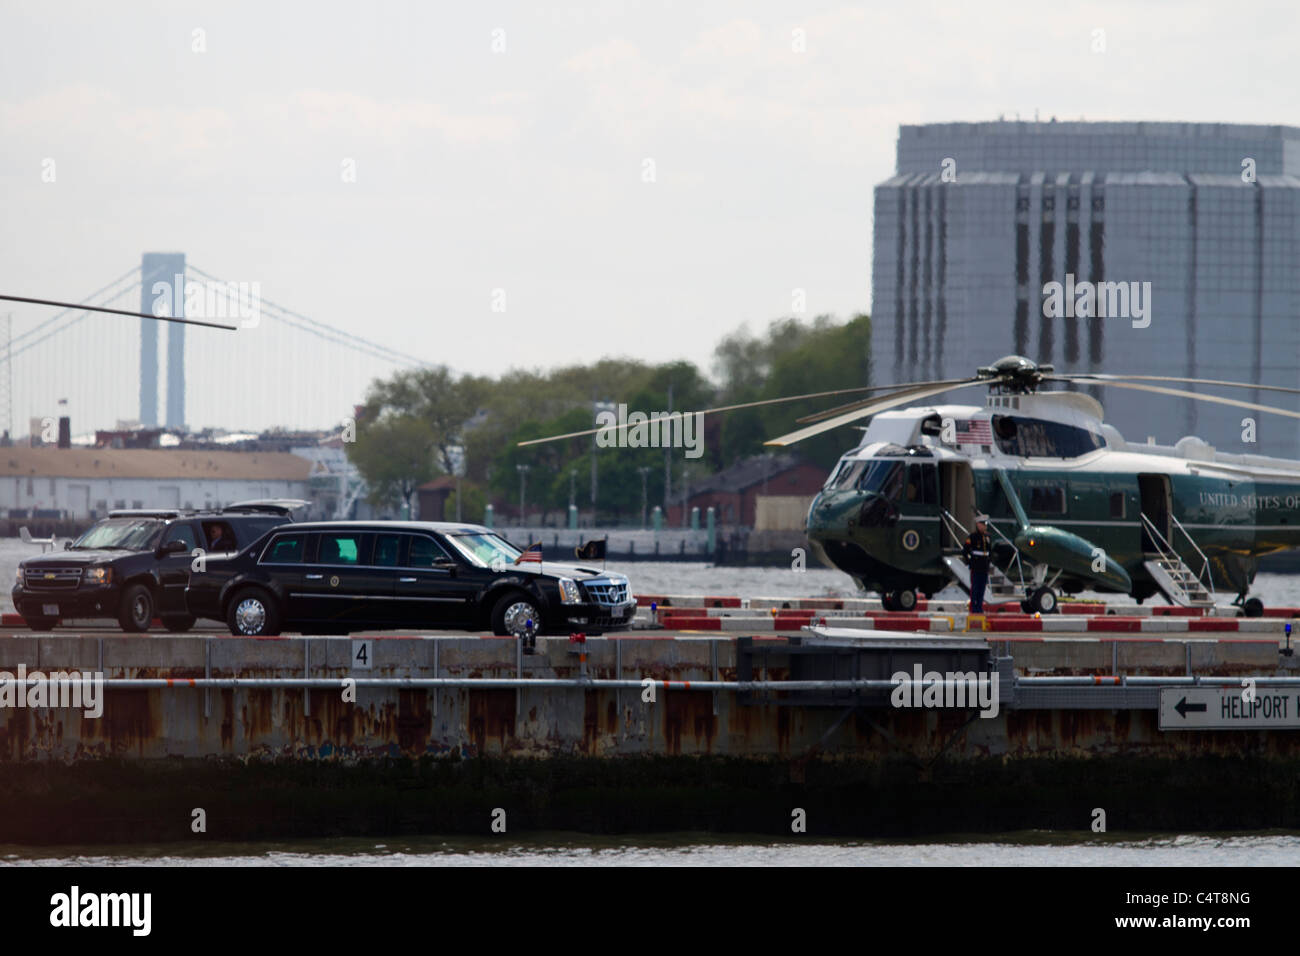 The presidential motorcade arrives at Marine One at a heliport in Lower Manhattan after the President's speech at Ground Zero Stock Photo